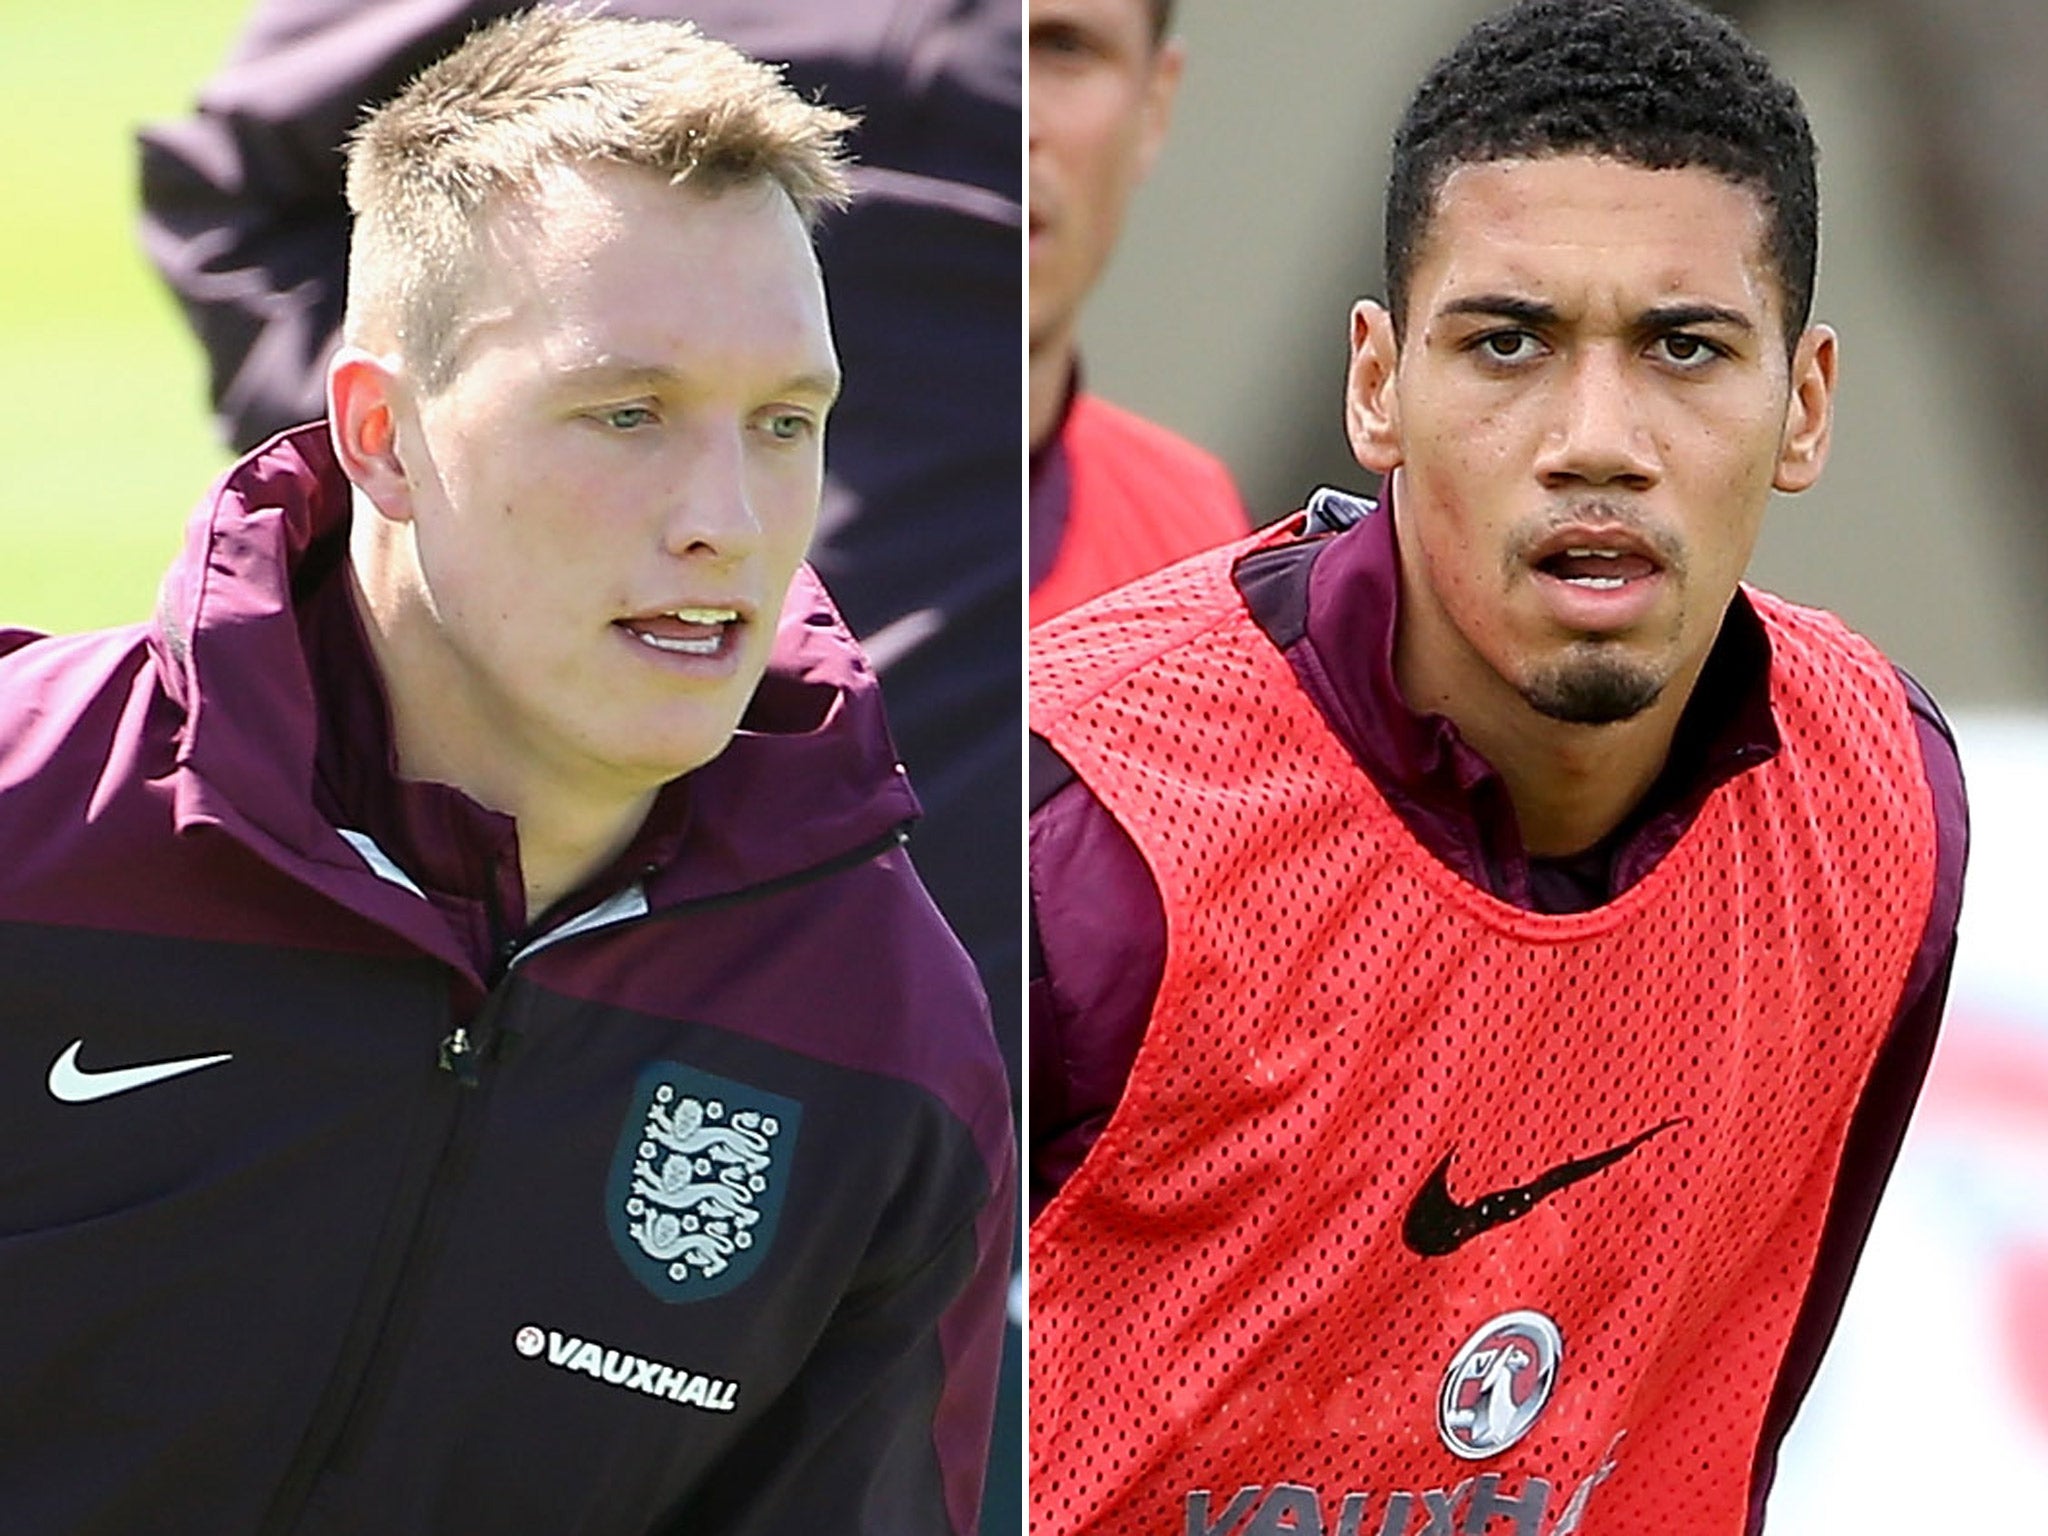 Phil Jones and Chris Smalling during training at Vale Do Lobo